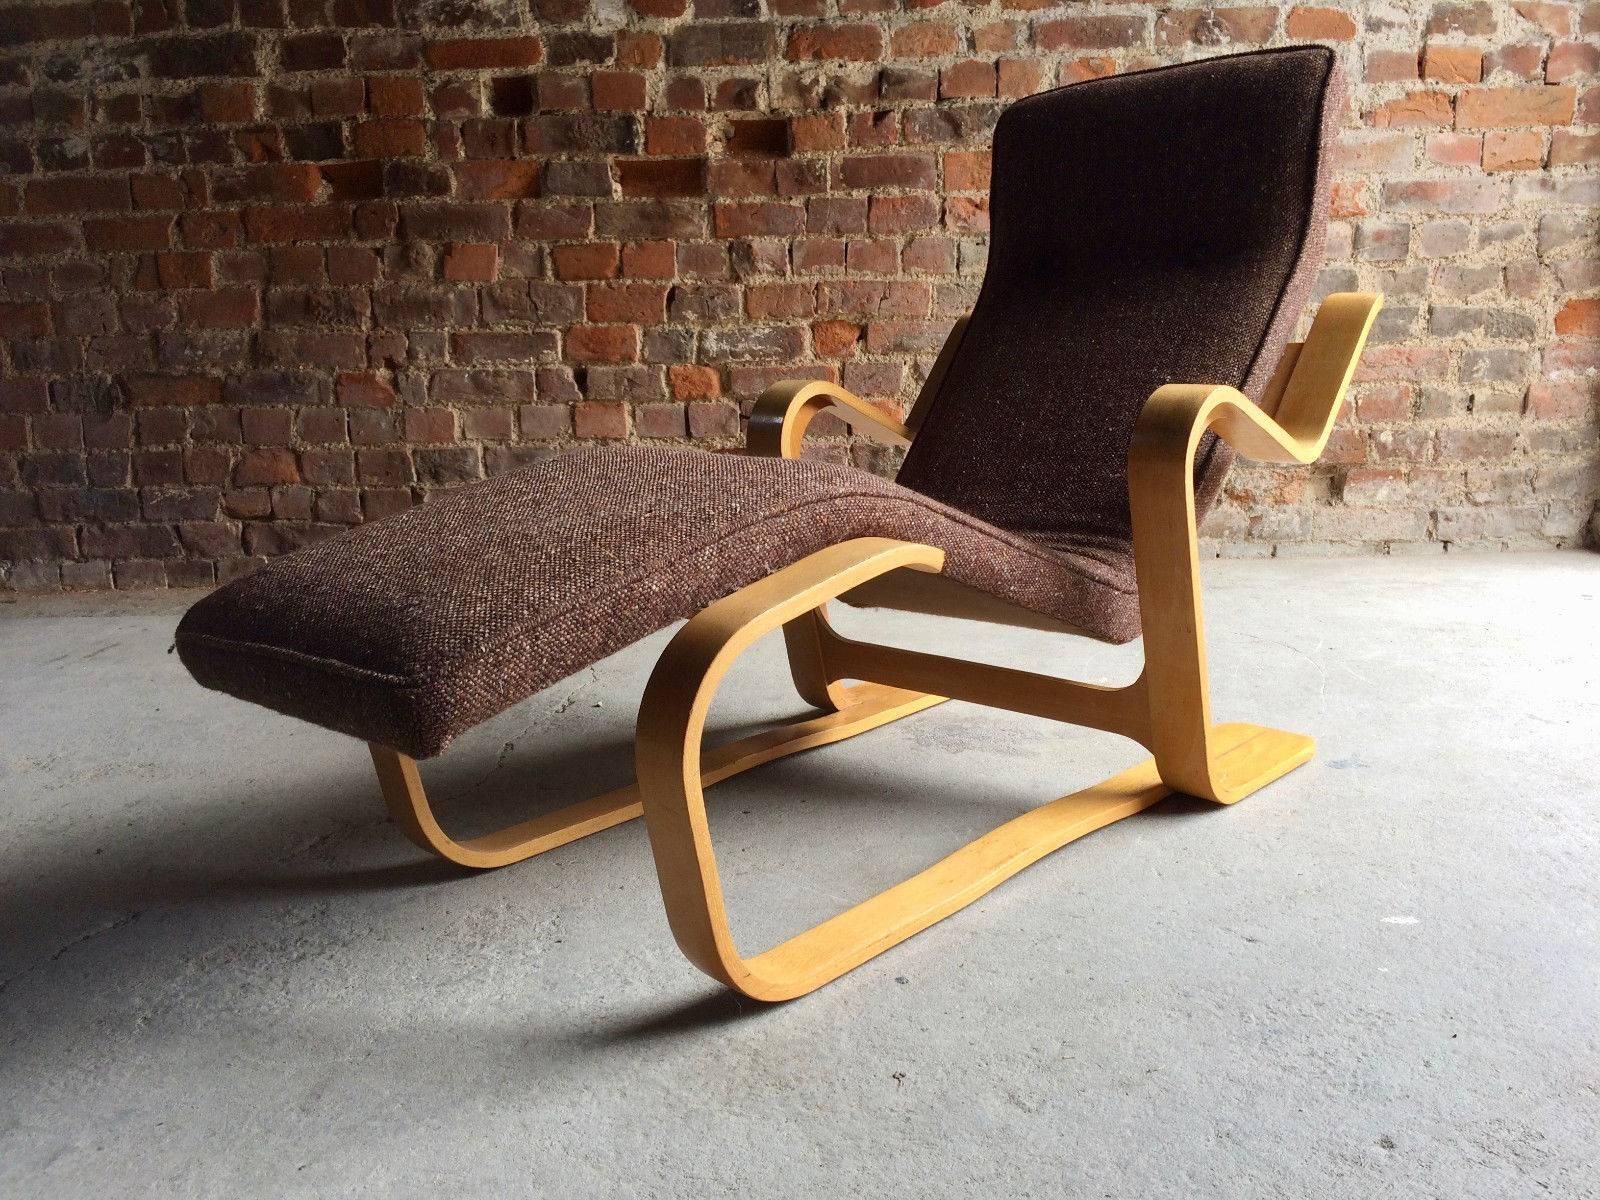 A fabulous Marcel Breuer long chair (1902-1981) as featured in the Victoria and Albert Museum ((V&A) London, Marcel Breuer has been described as one of the most influential designers of the 20th century. He was an architect and furniture designer,